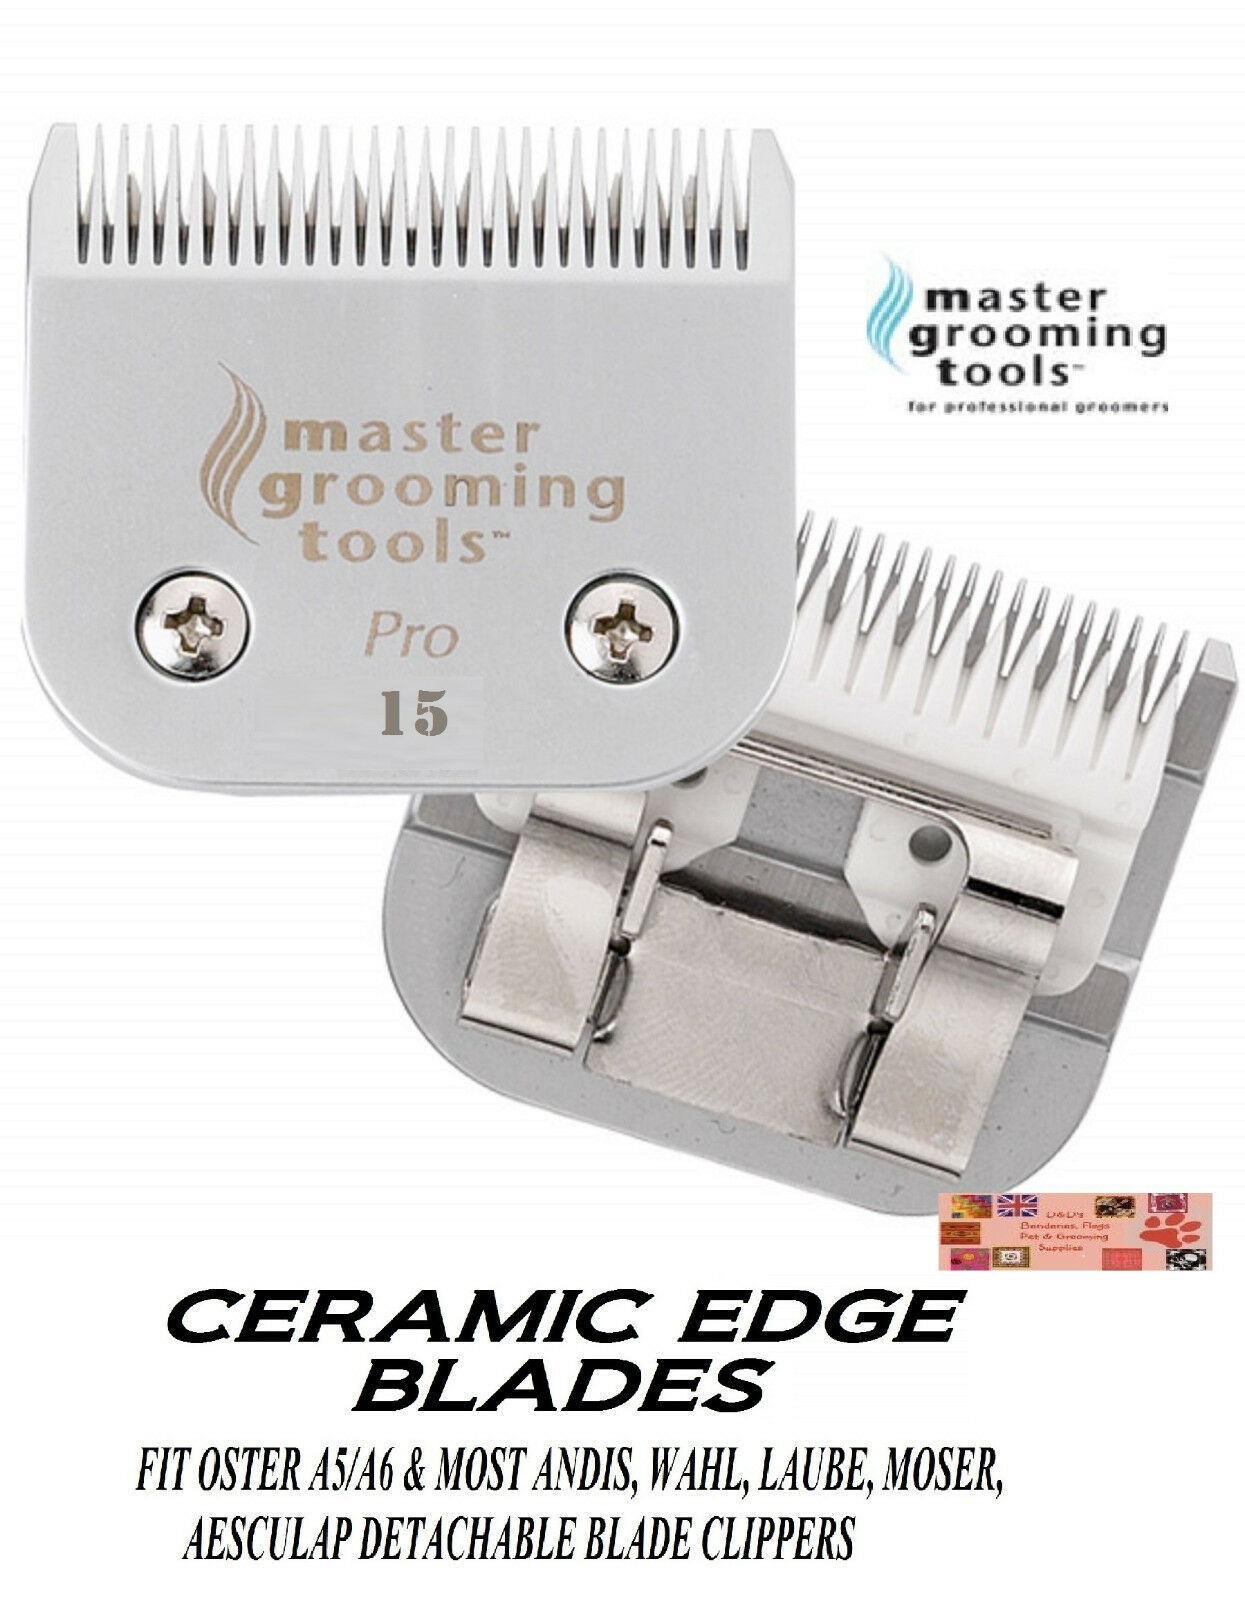 PRO CERAMIC Edge Pet Grooming 15 Blade Fit Oster A5 A6,Many Andis,Wahl Clipper